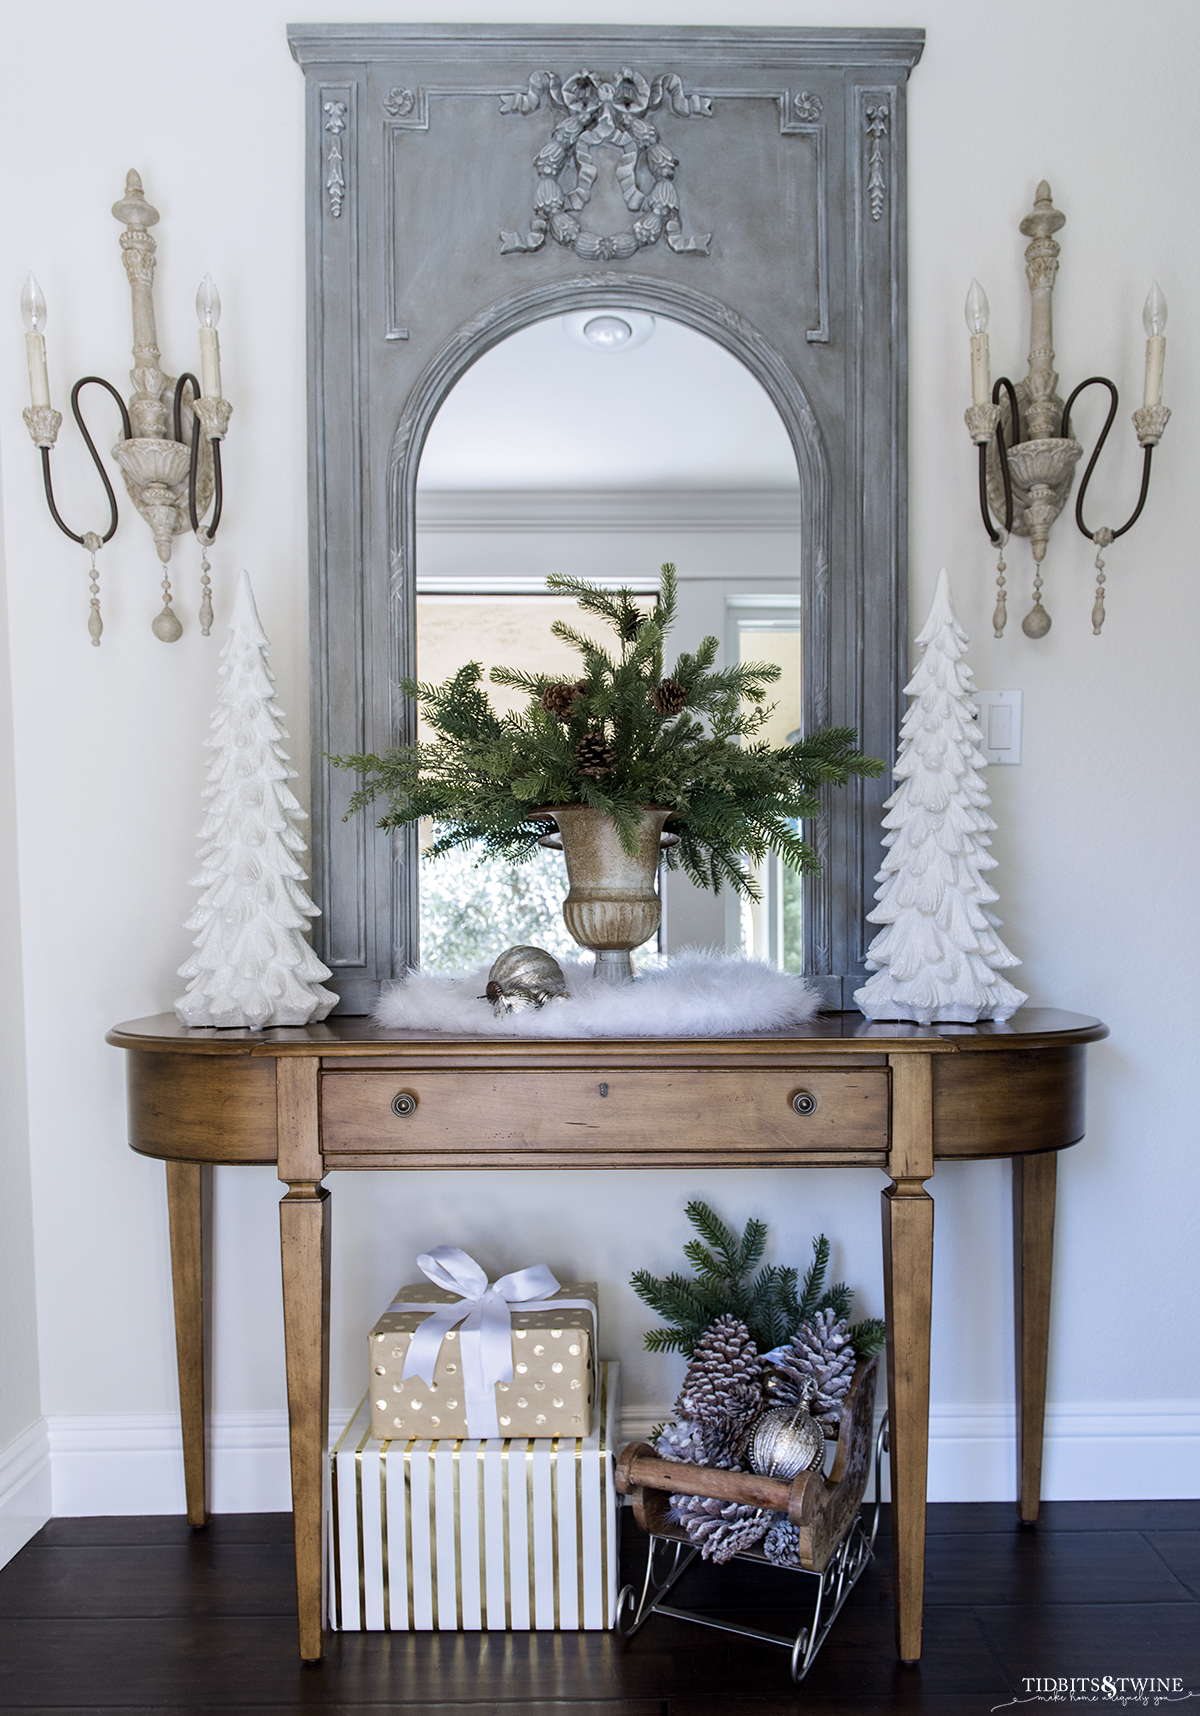 Entryway with small table decorated for Christmas with greens in a french urn flanked by white christmas trees and a blue french trumeau mirror on the wall